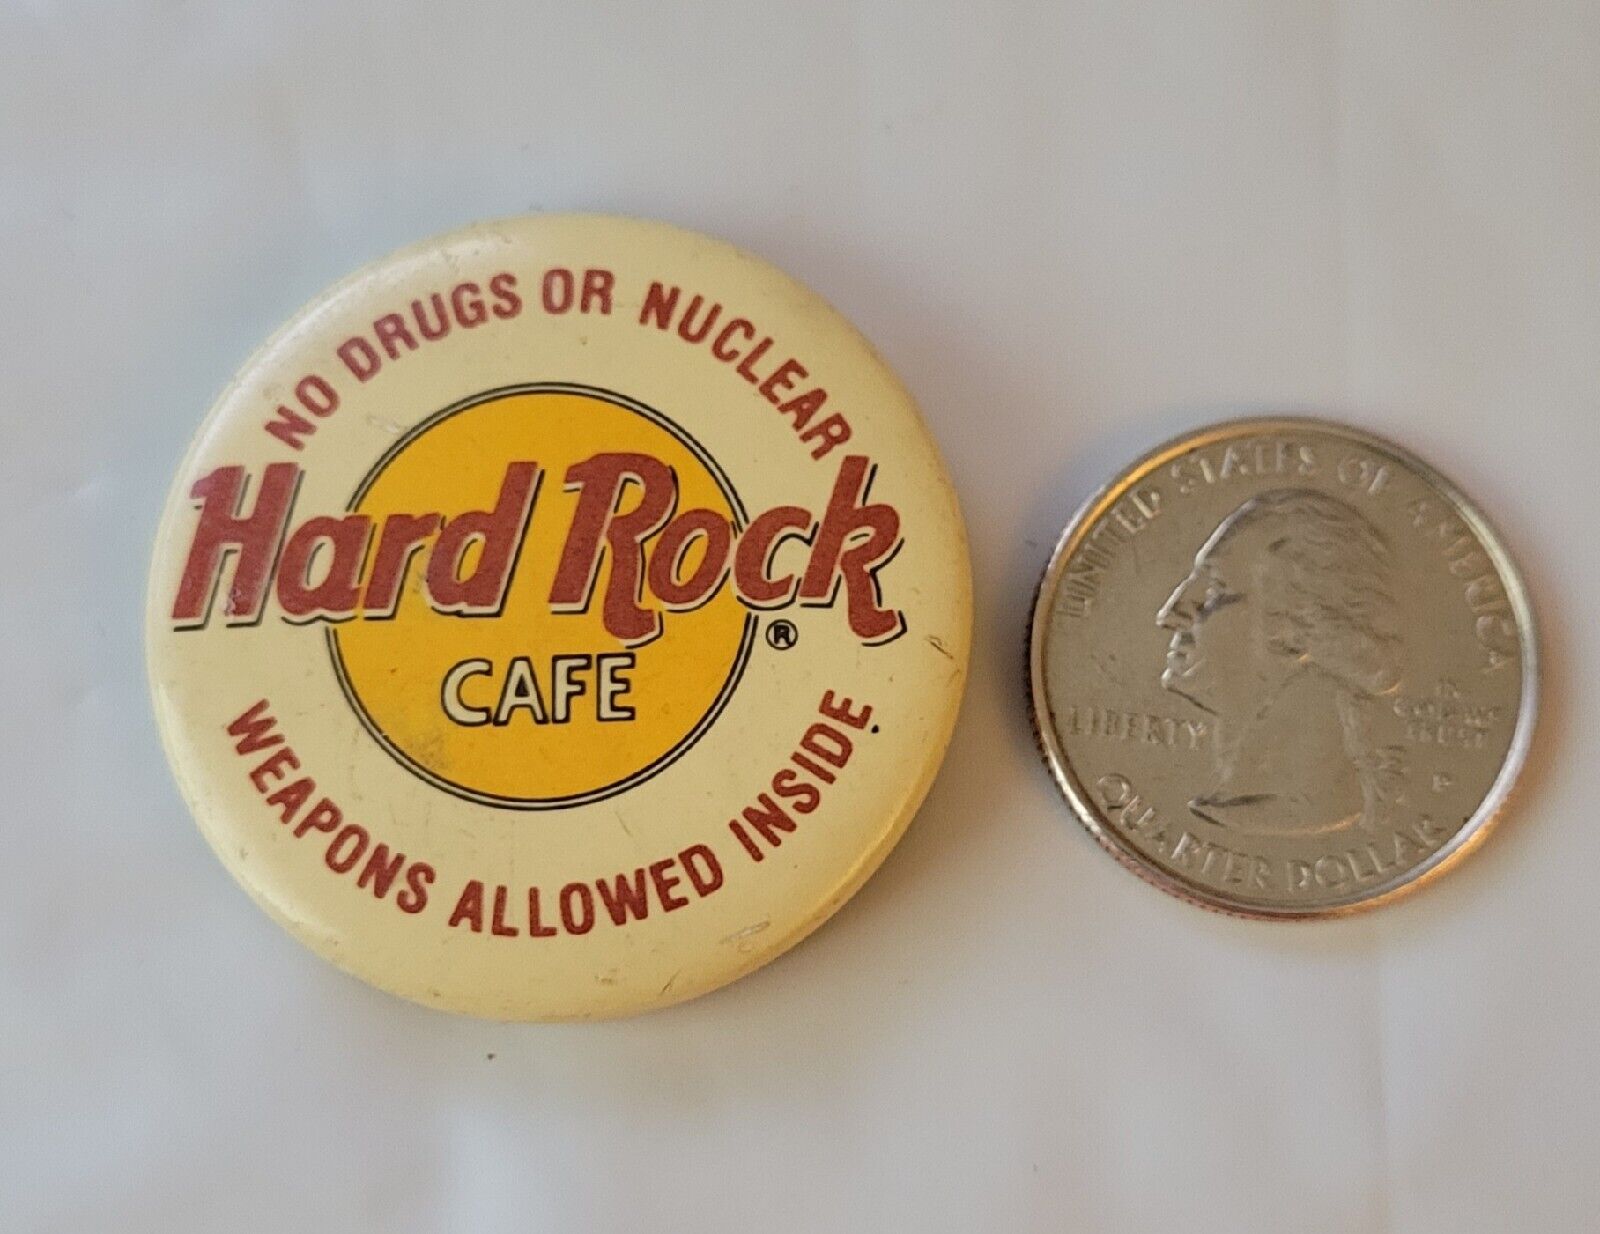 Vintage Hard Rock Cafe Pin Button No Drugs or Nuclear Weapons Allowed Inside